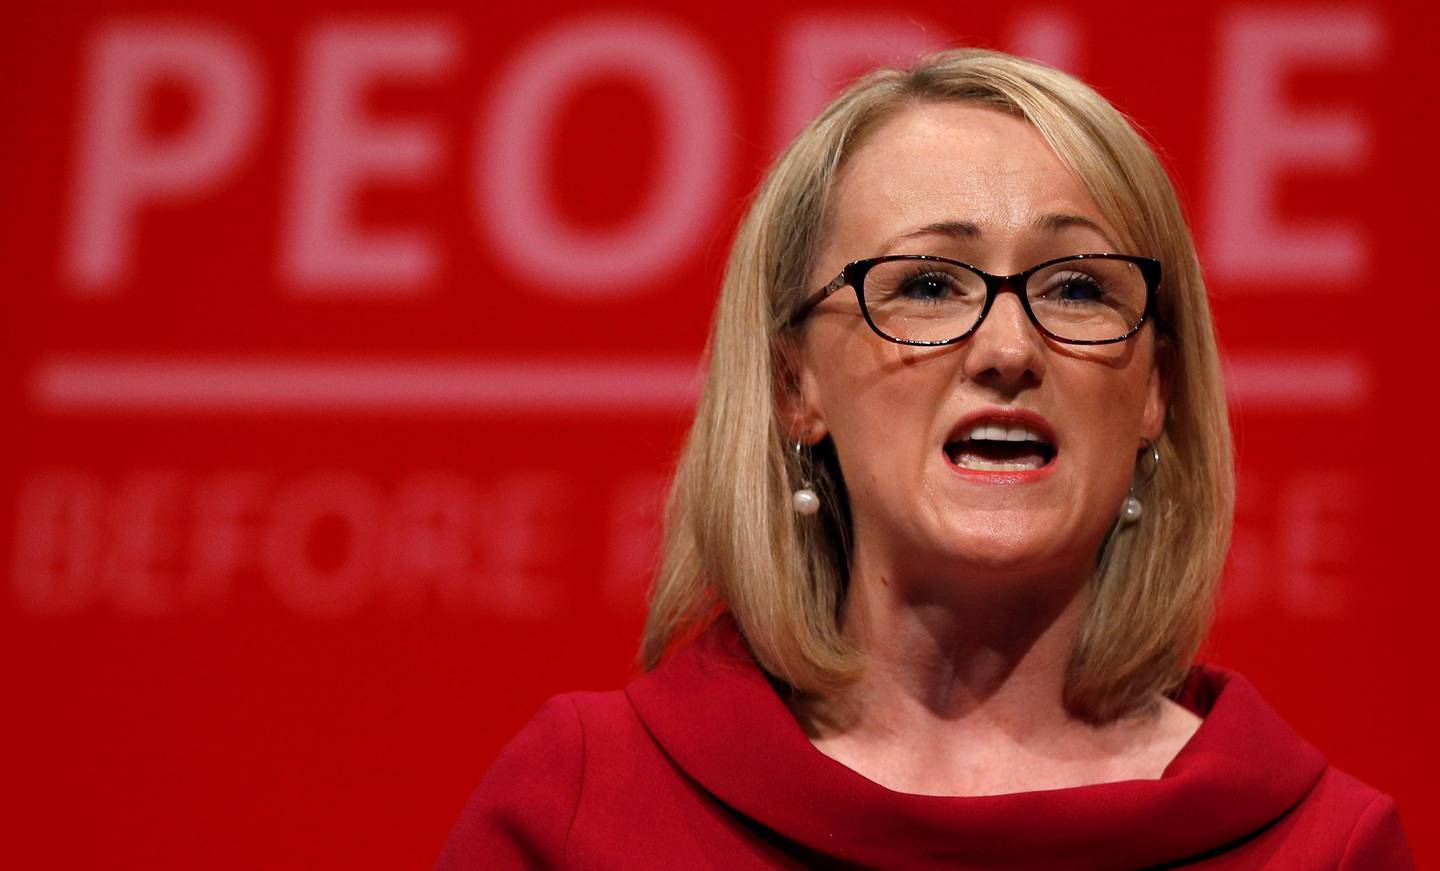 FILE PHOTO: British Labour Party MP Rebecca Long-Bailey speaks at the Labour party annual conference in Brighton, Britain September 24, 2019.  REUTERS/Peter Nicholls/File Photo